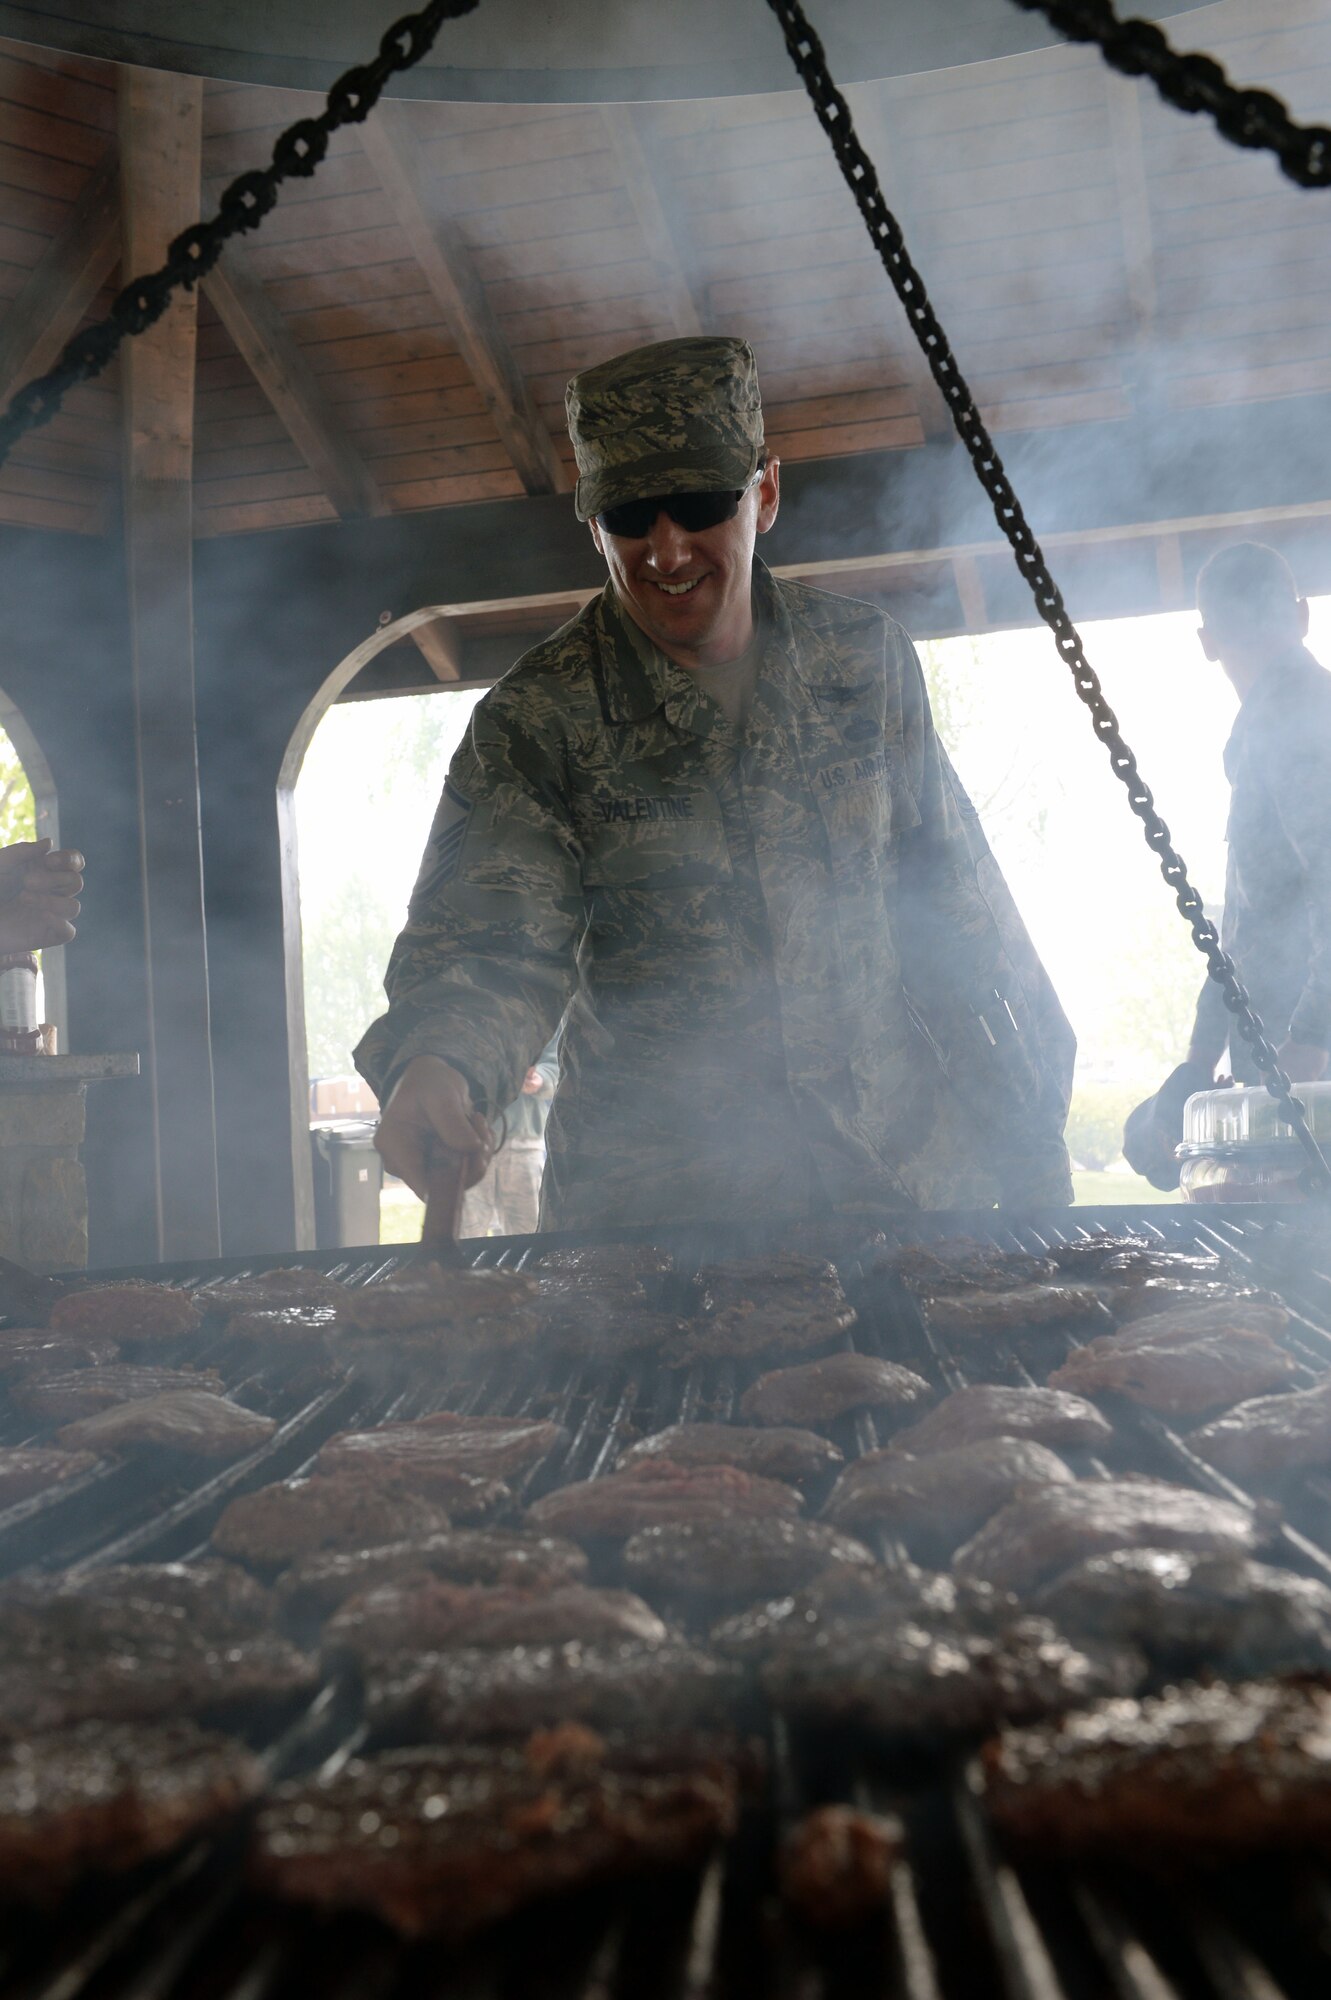 U.S. Air Force Master Sgt. Donald Valentine, 52nd Fighter Wing Inspector General complaint resolution director from Sandusky, Ohio, flips burger patties during a base-wide cookout at the wing pavilion on Spangdahlem Air Base, Germany, April 18, 2014. Spangdahlem’s men and women’s groups, The Roundtable and Spangdamen, worked the cookout as part of the wing’s Sexual Assault Prevention and Response down day. (U.S. Air Force photo by Staff Sgt. Chad Warren/Released)